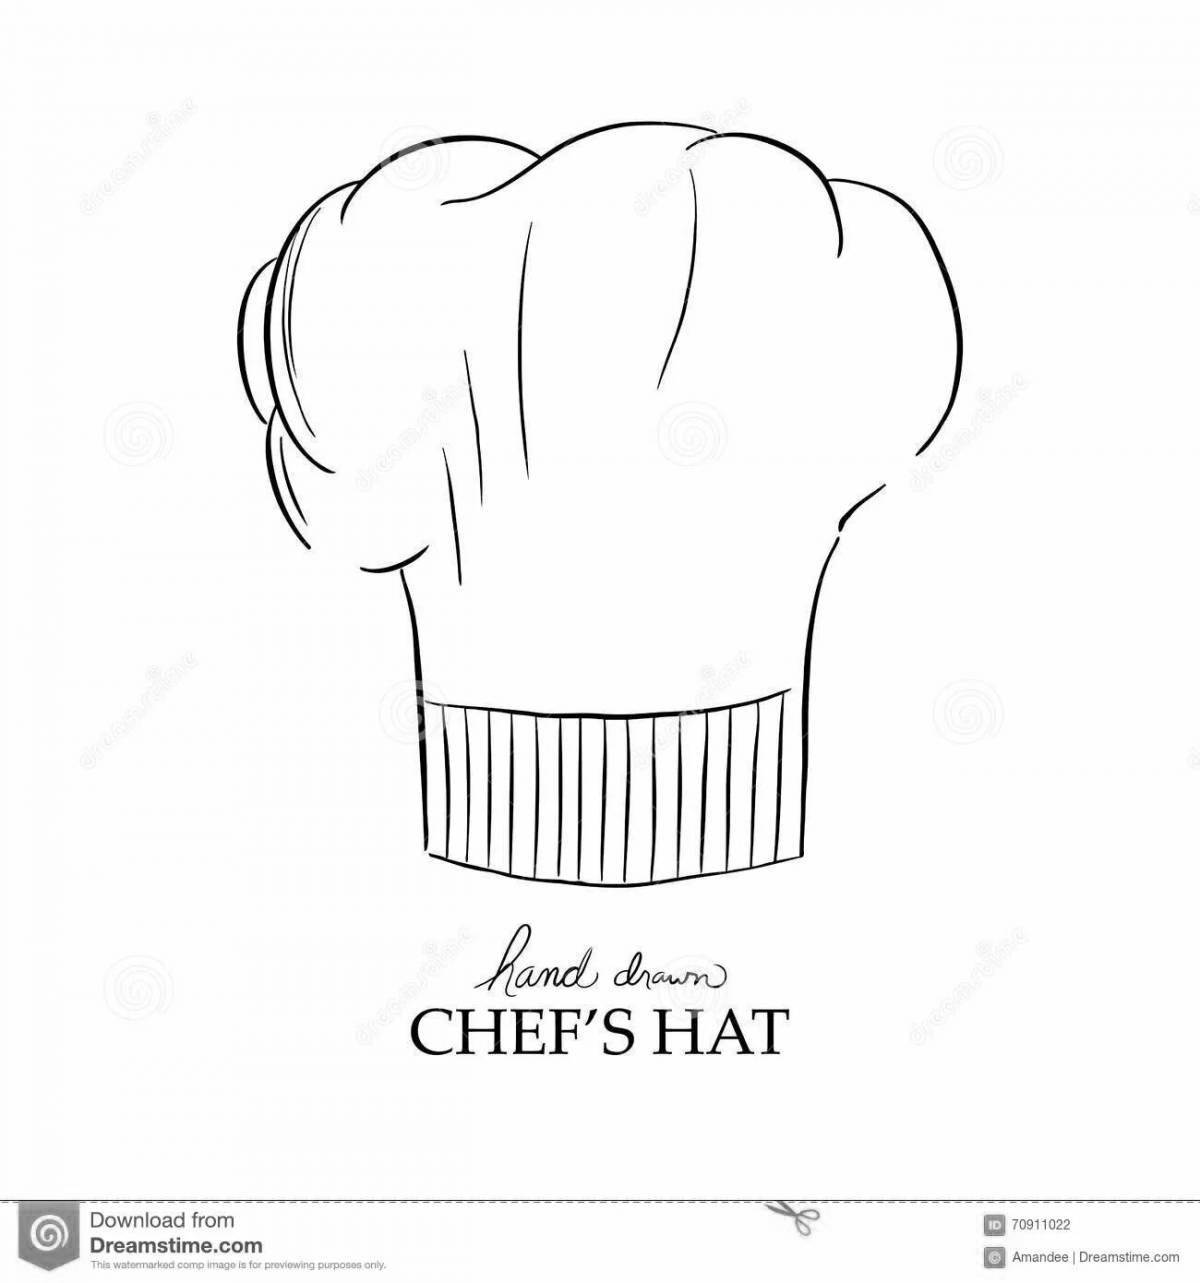 Coloring page attractive chef's hat